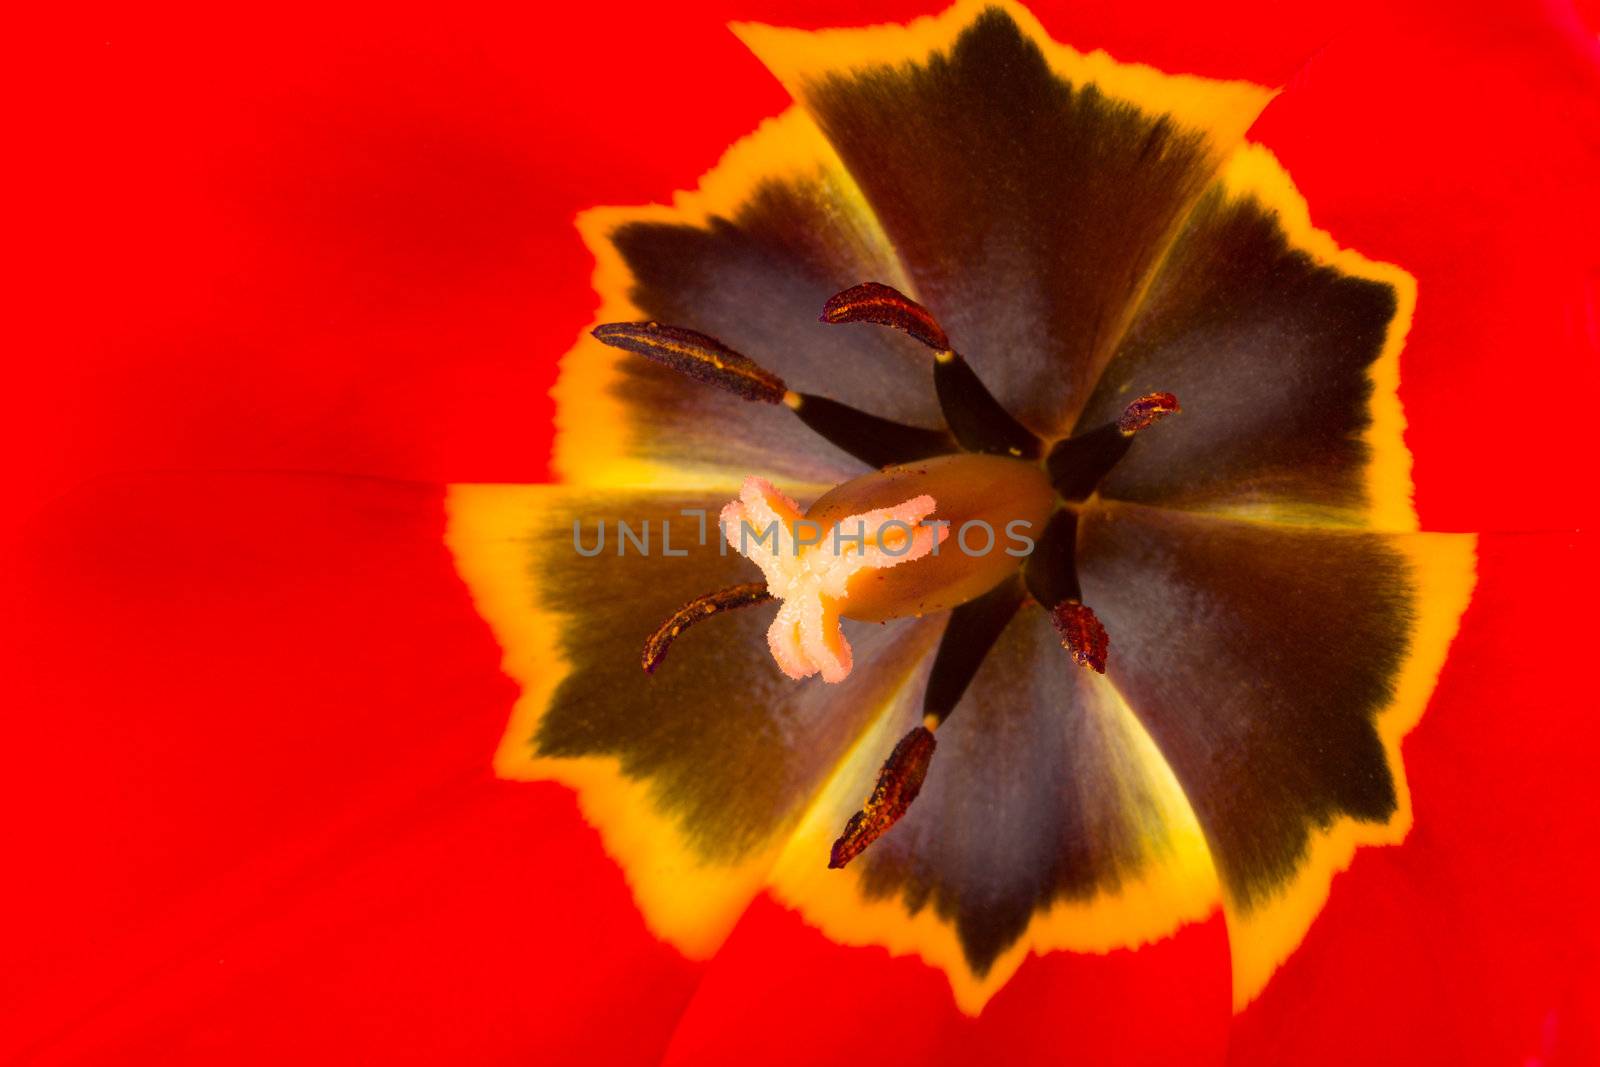 red tulip by Alekcey